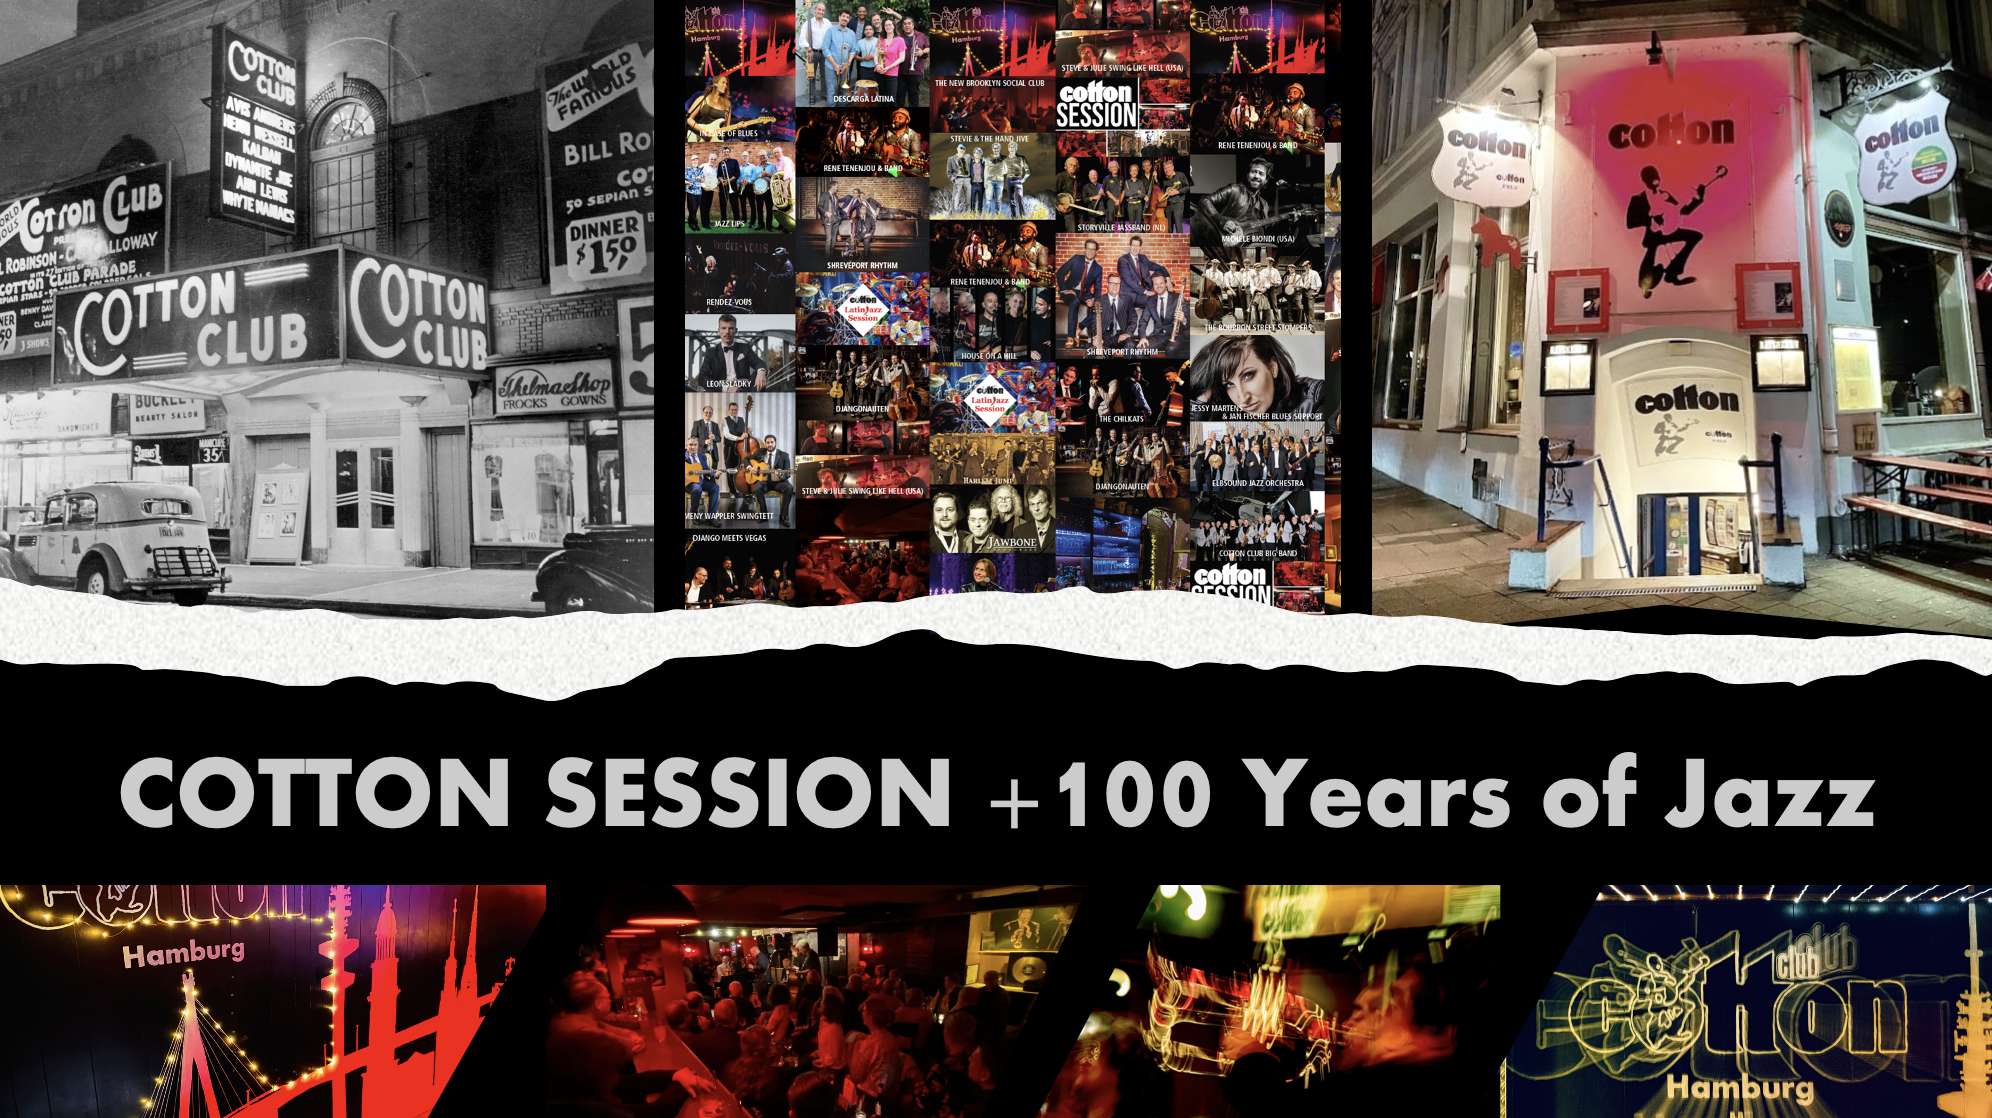 COTTON SESSION +100 YEARS OF JAZZ - led by Sven Enge (Swing & Mainstream)